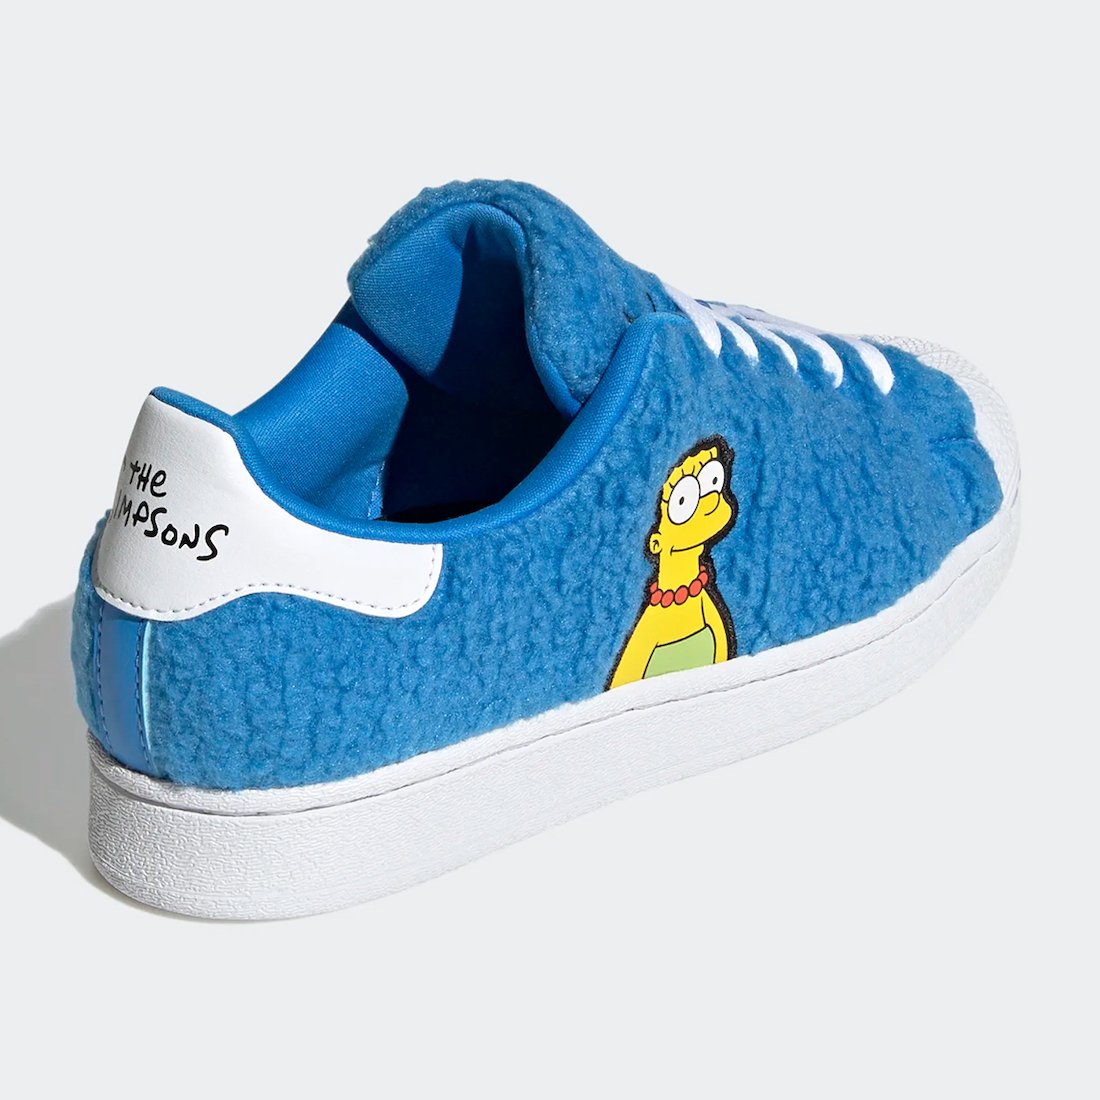 The Simpsons adidas Superstar Marge Simpson GZ1774 Release Date Info